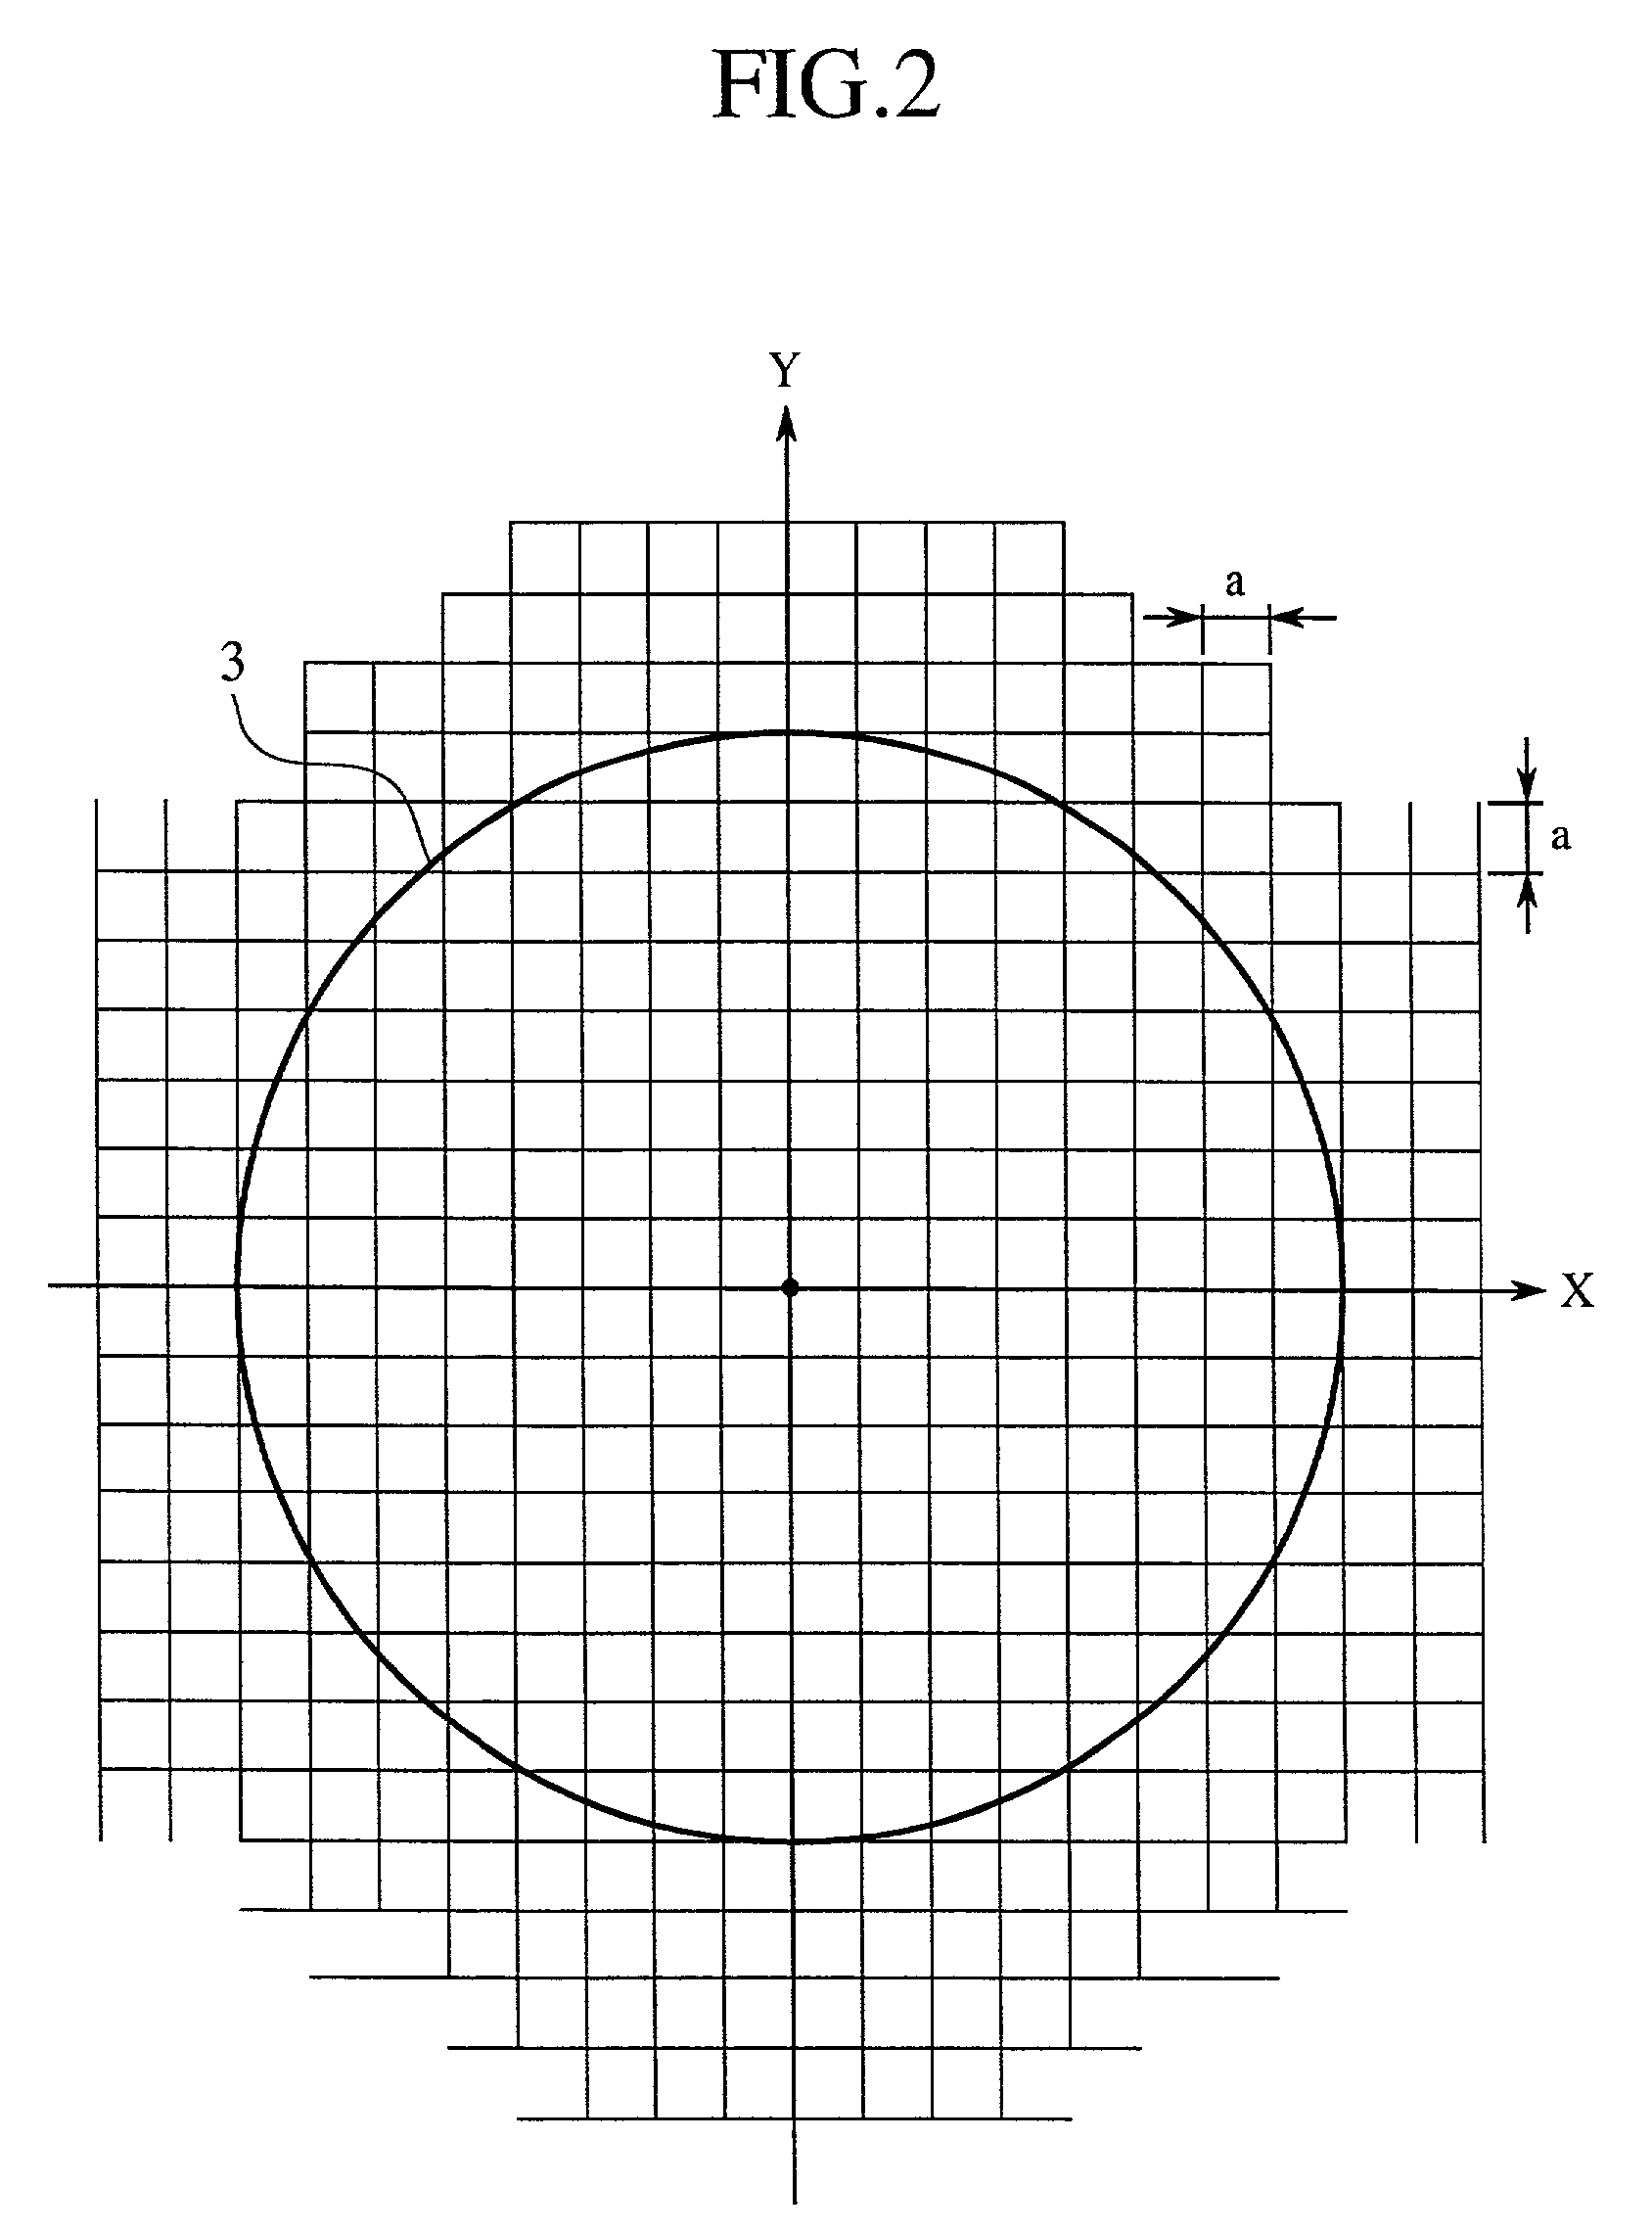 Radiation treatment plan making system and method